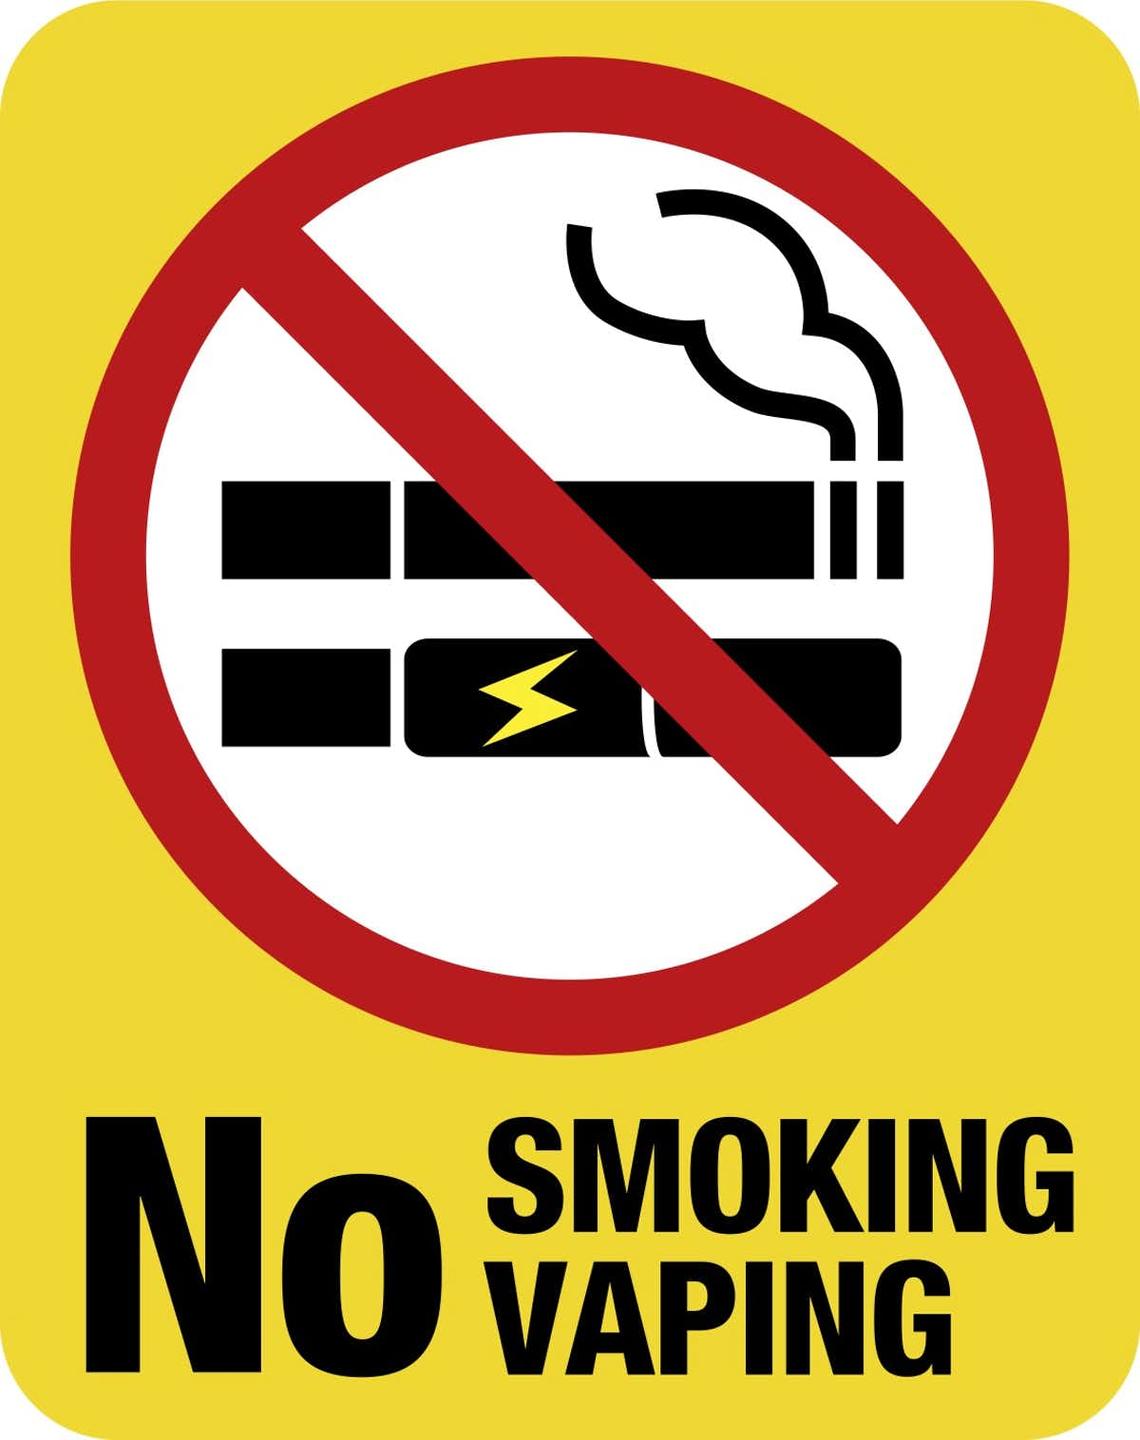 Vaping should be banned wherever smoking is prohibited.